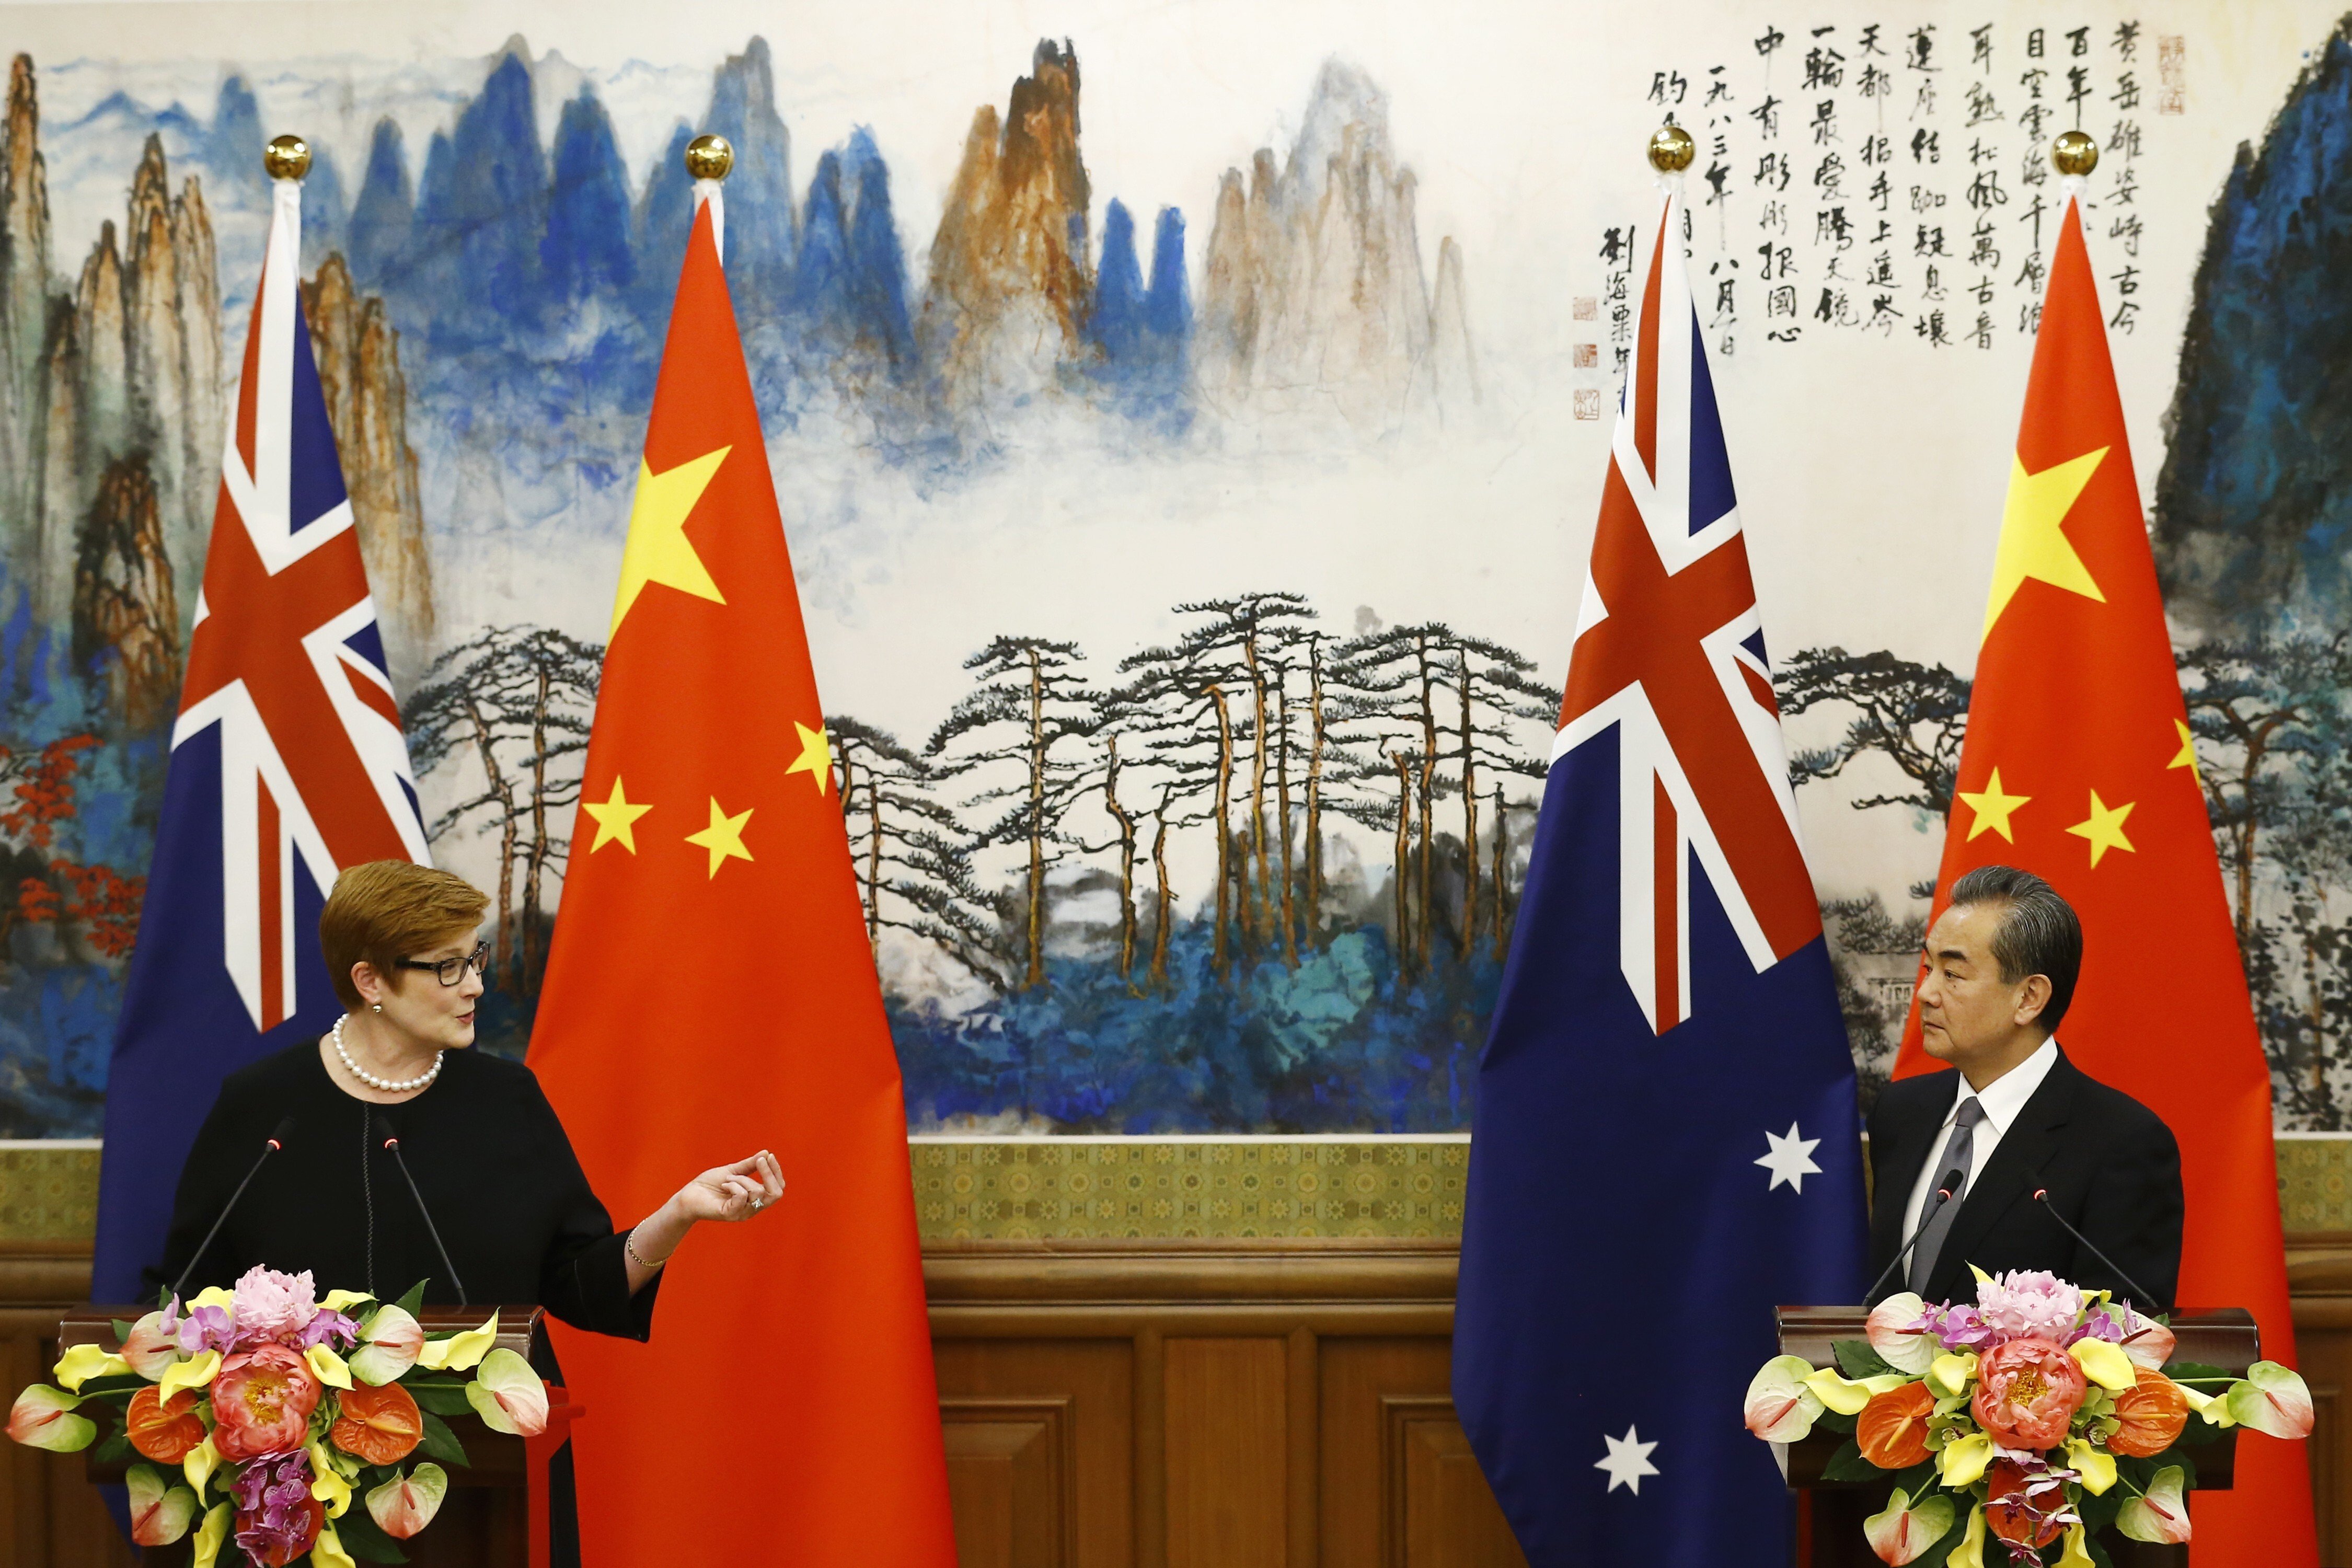 Australian Foreign Minister Marise Payne and Chinese Foreign Minister Wang Yi are seen after a meeting in Beijing in 2018. Photo: EPA-EFE